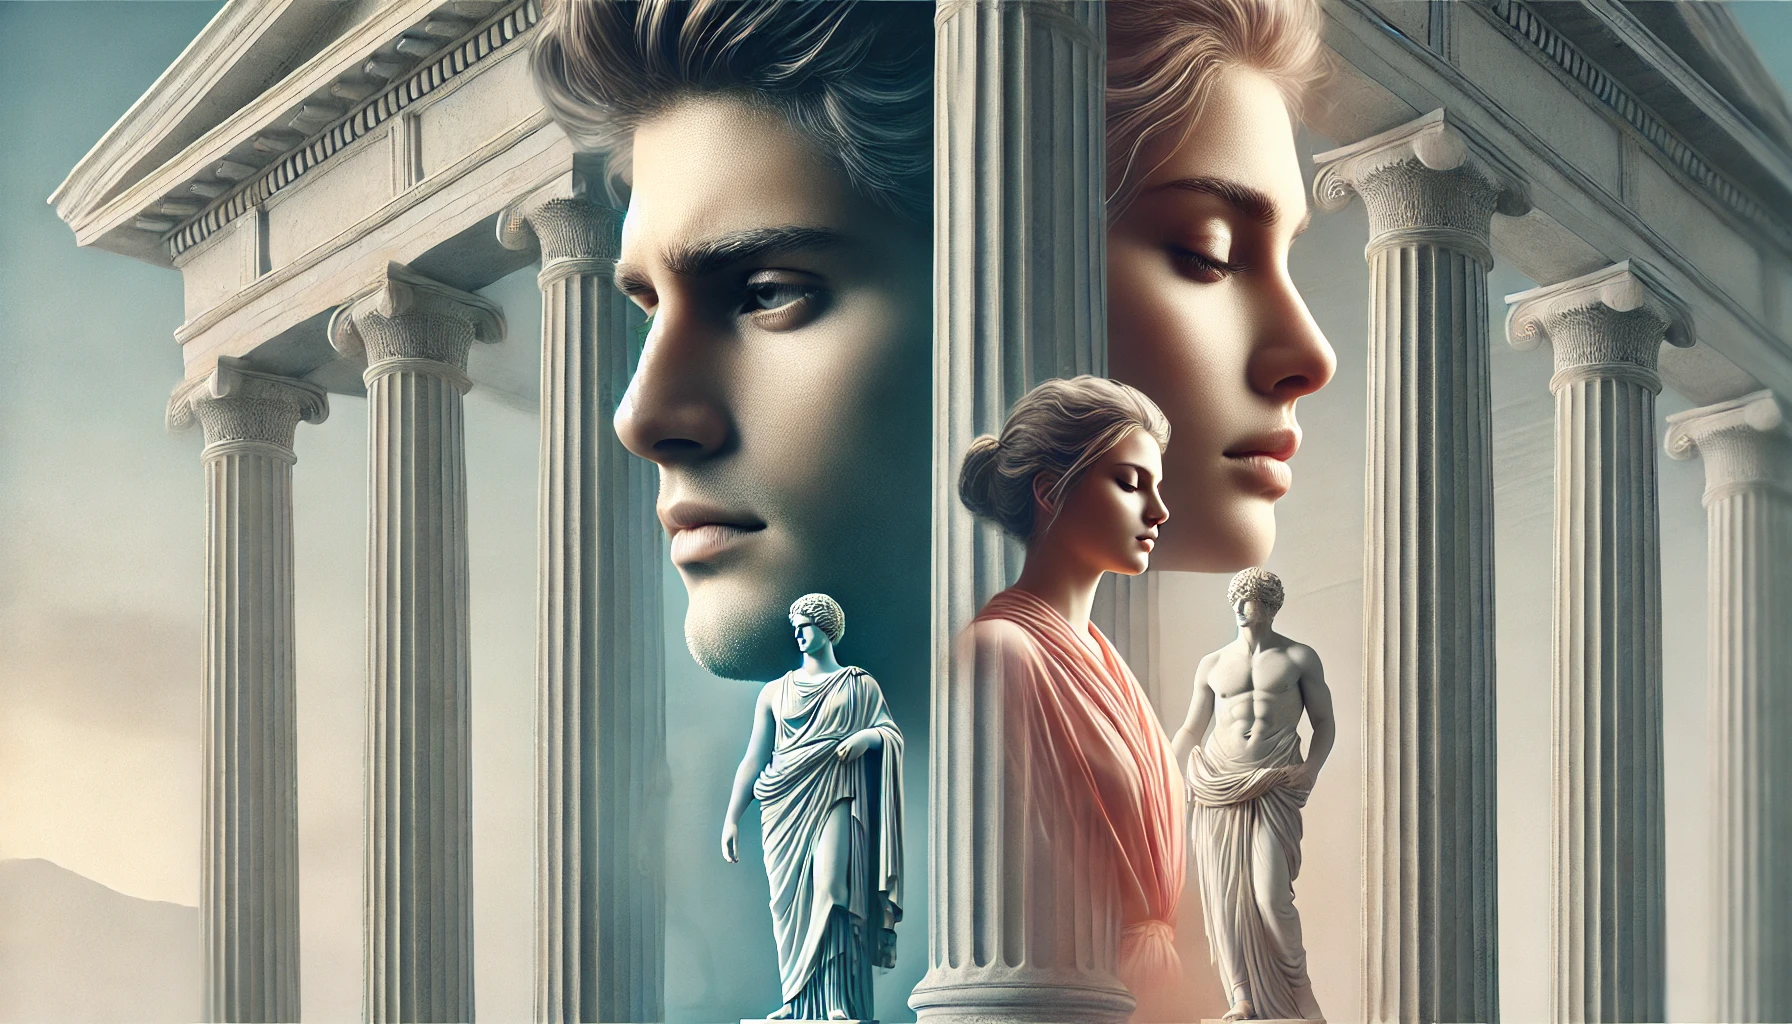 Modern individuals standing amidst ancient Greek columns, reflecting deeply, symbolizing the integration of Stoic virtues into contemporary life.